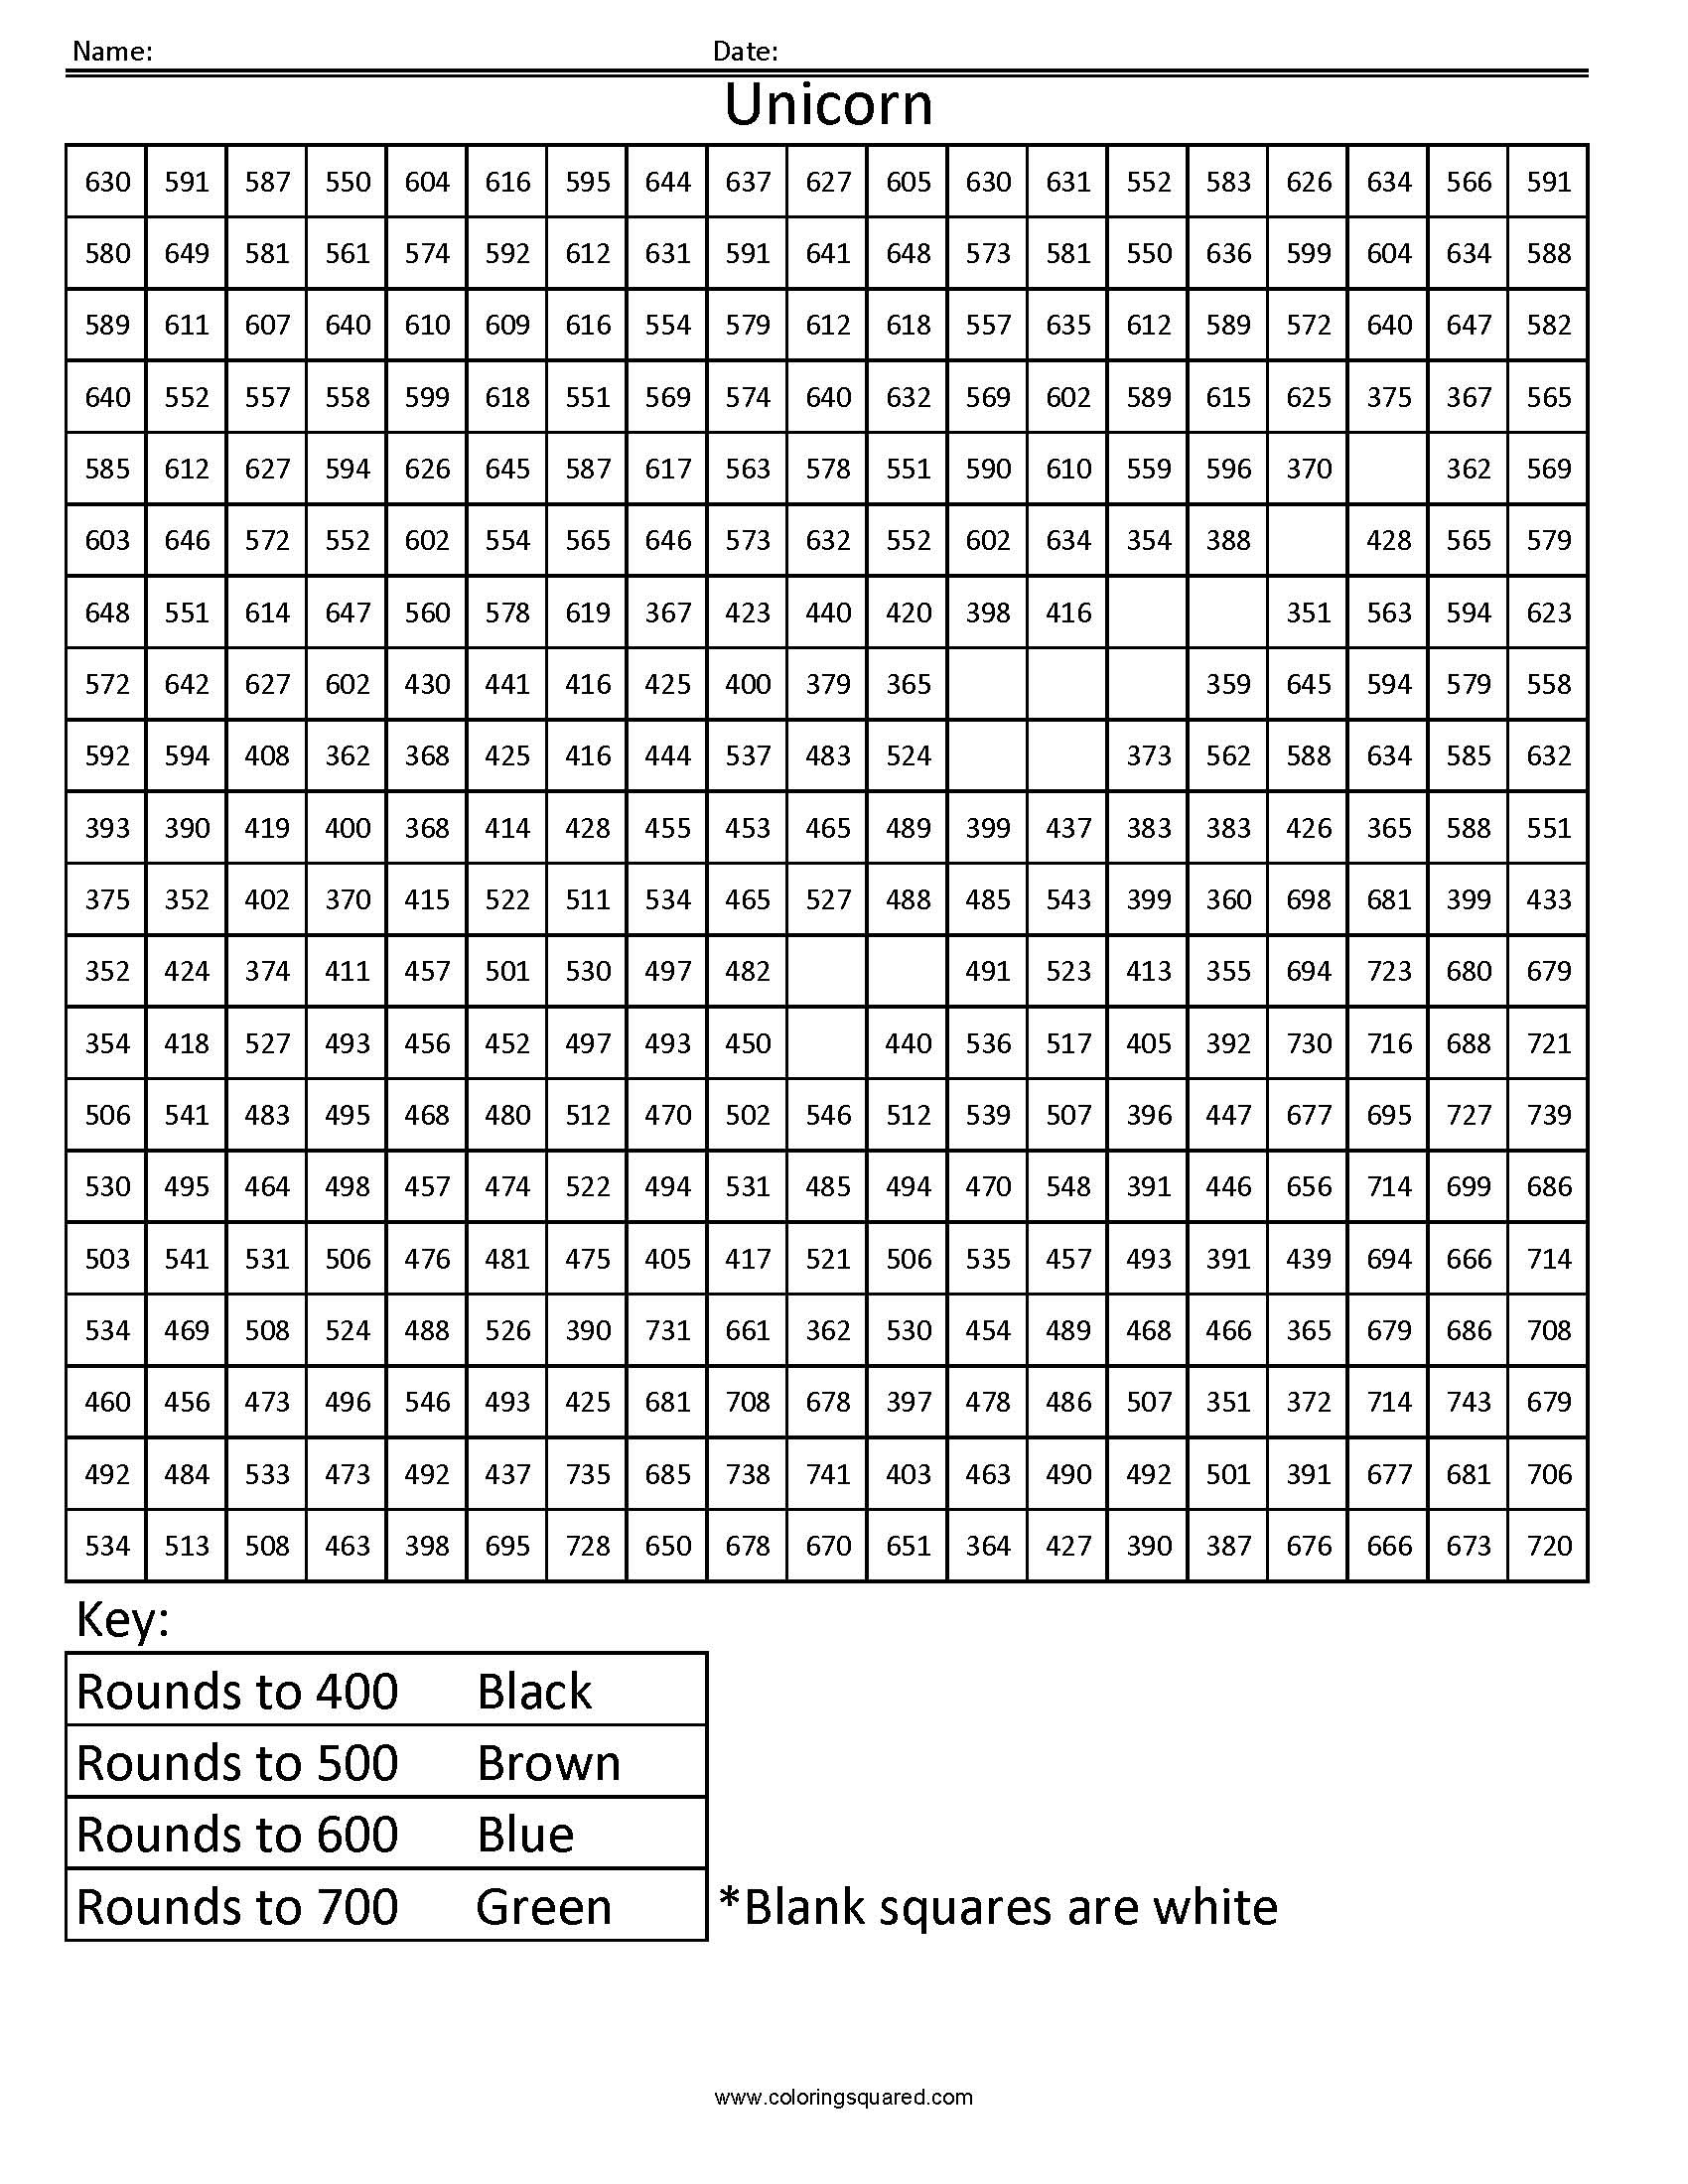 Unicorn- Rounding Hundreds Place - Coloring Squared - Free Printable Math Mystery Picture Worksheets